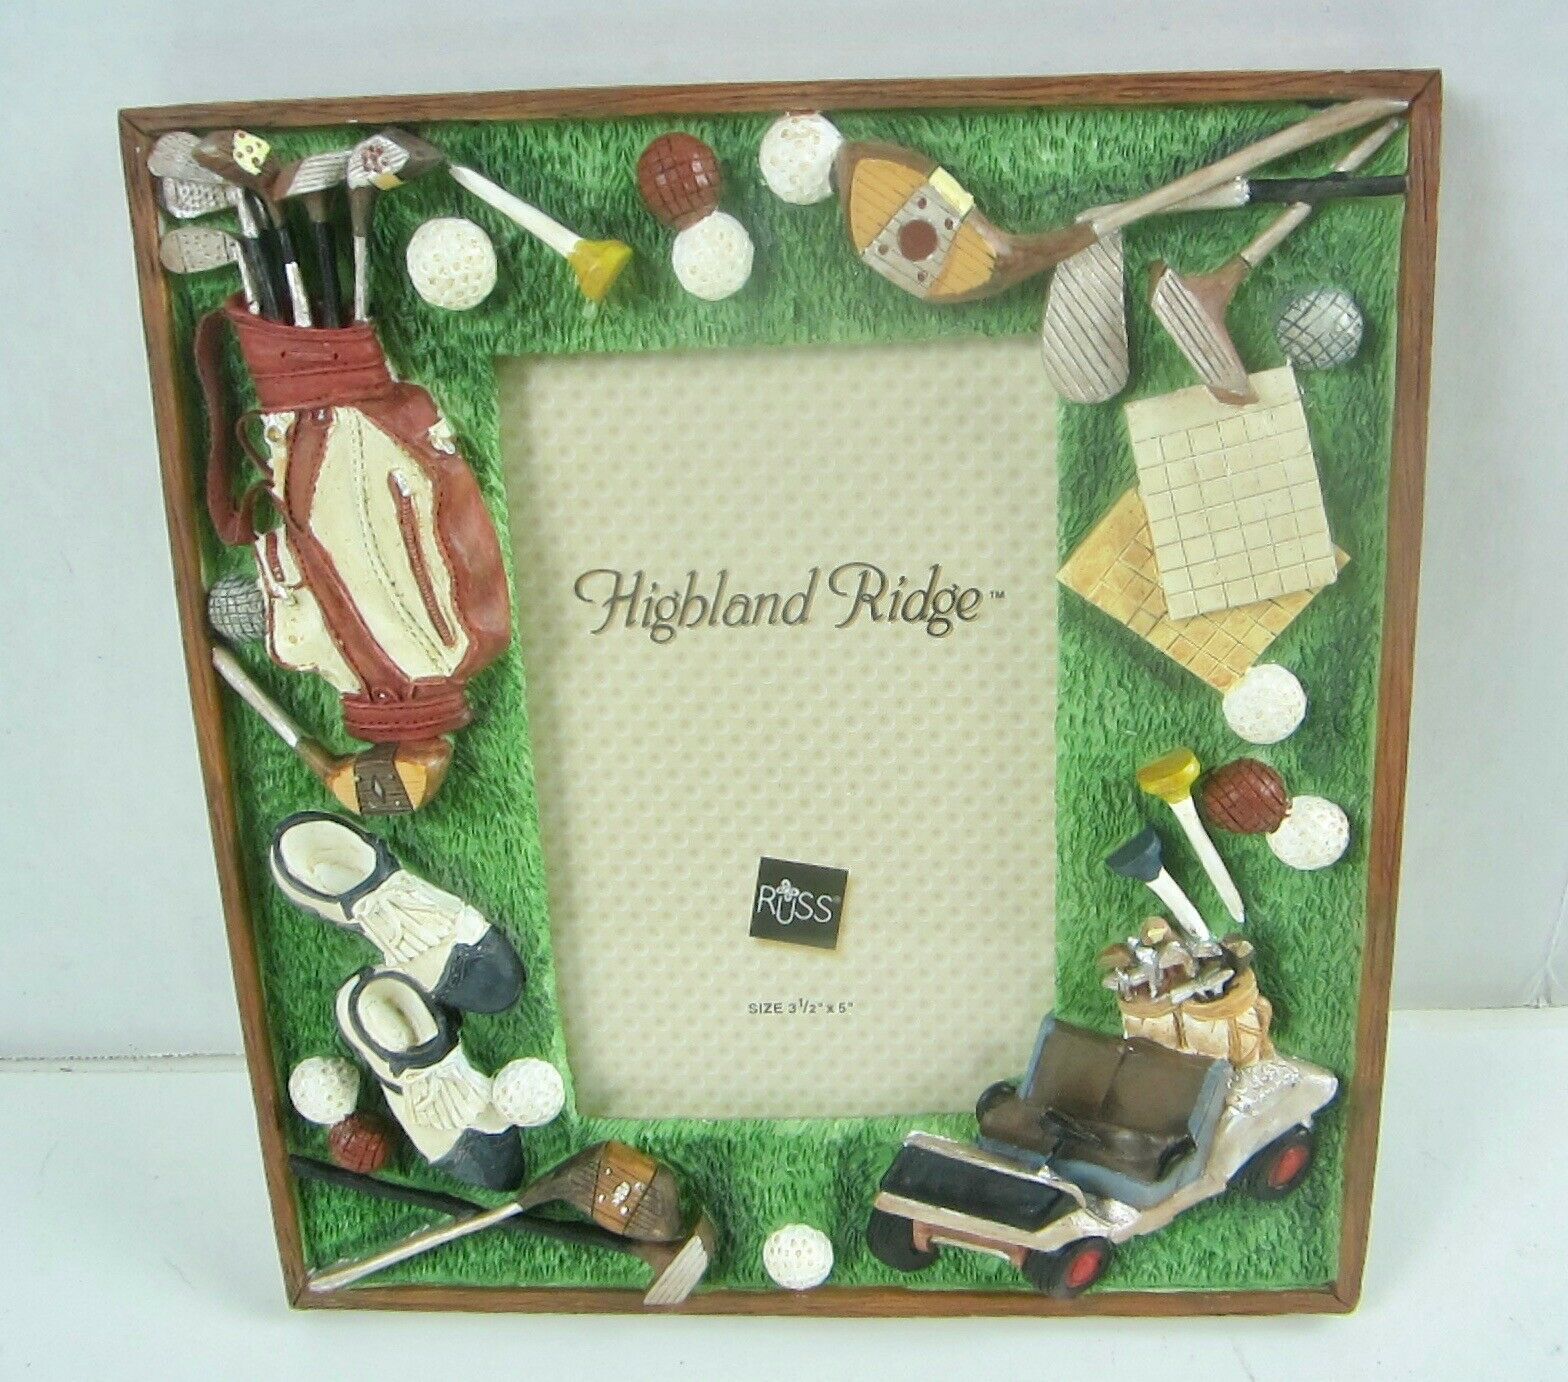 Primary image for New Russ Highland Ridge 3D Golf Picture Frame - Holds 3 1/2" x 5" Photo